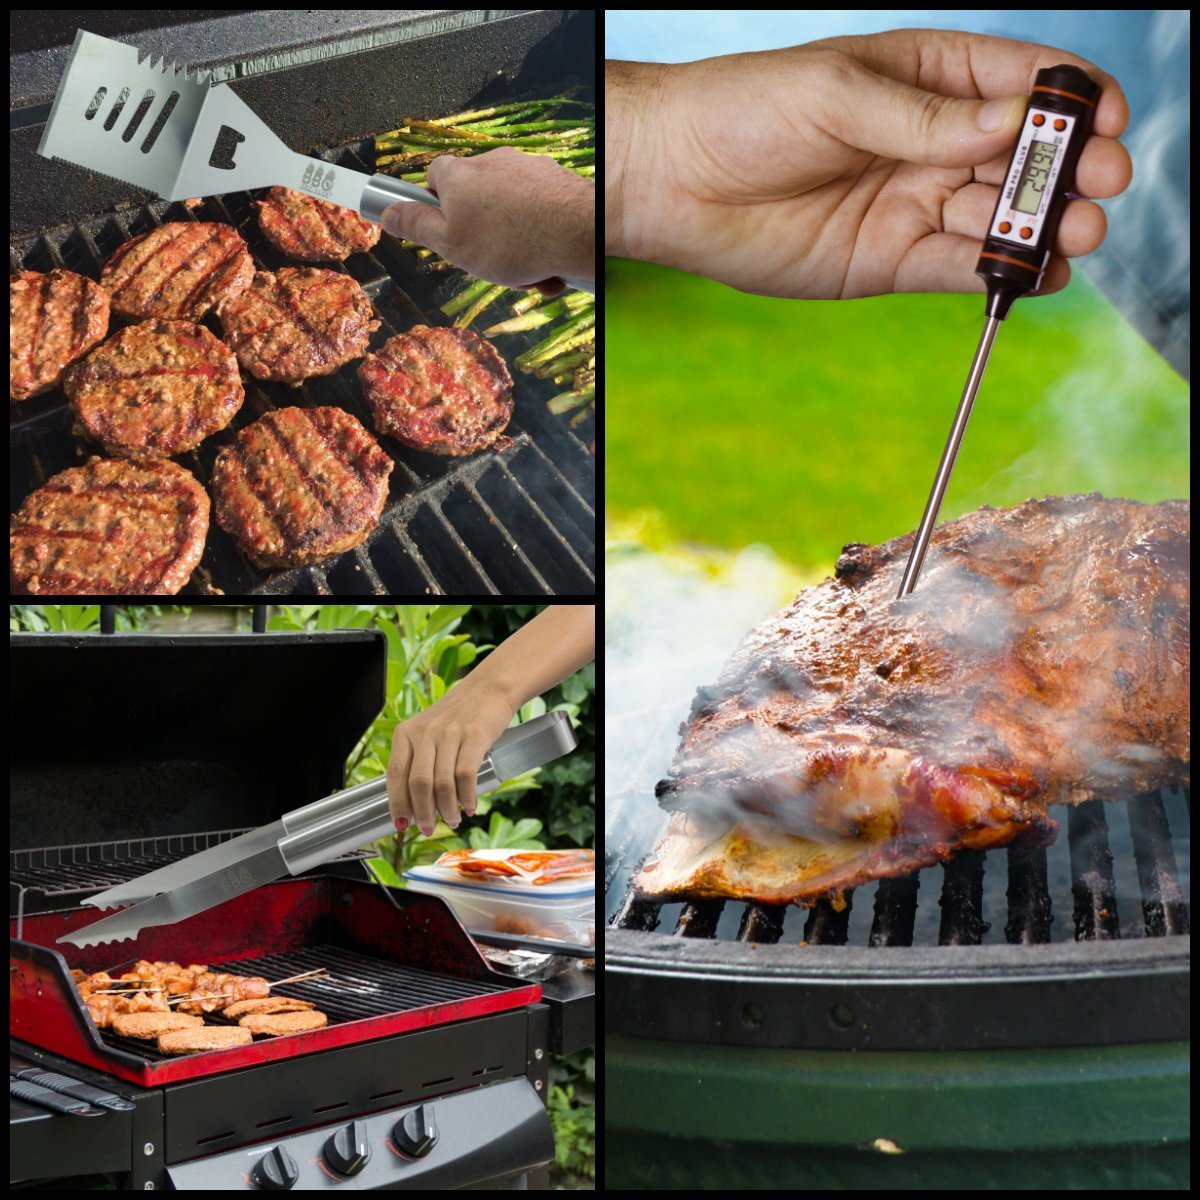 Grill Accessories, 4 piece BBQ Tool Grill Set - Grill Tools Includes Stainless Steel Metal Spatula, Fork, Tongs and Instant Read Meat BBQ Thermometer, Great For Gifts - By BBQ Pro Club - image 5 of 7